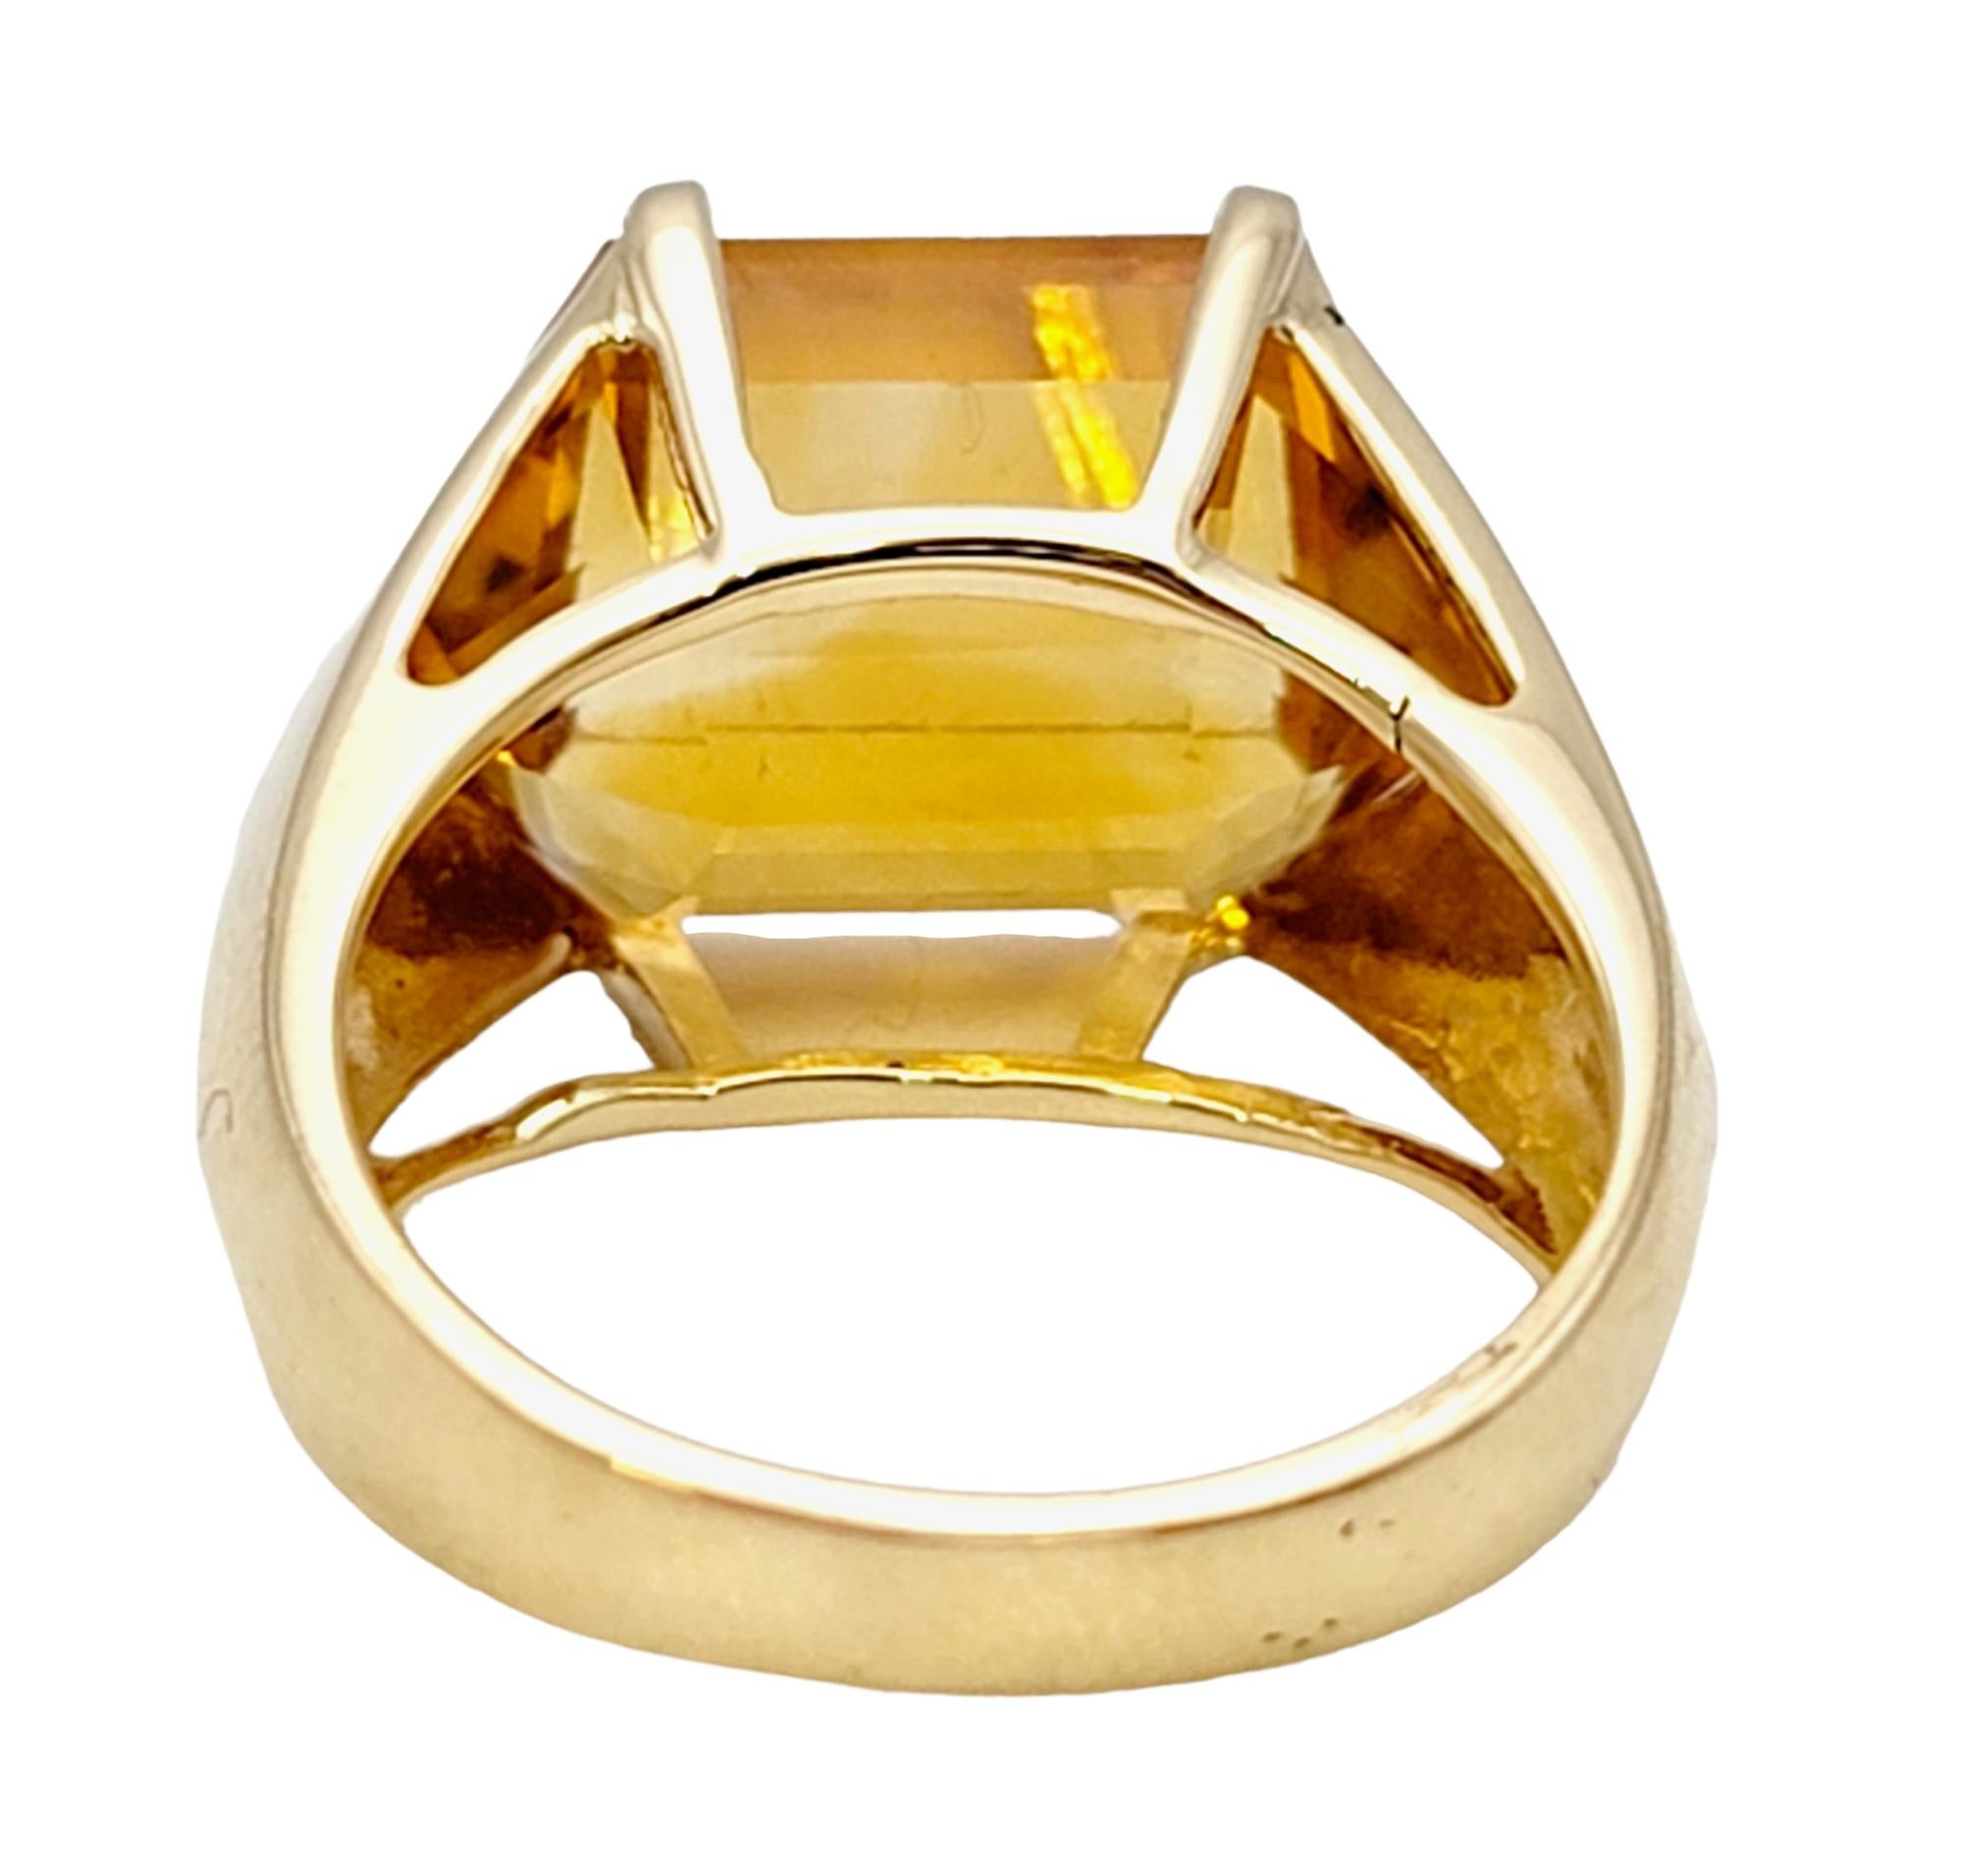 10.46 Carats Total Hexagonal Cut Citrine Cocktail Ring in 14 Karat Yellow Gold For Sale 3